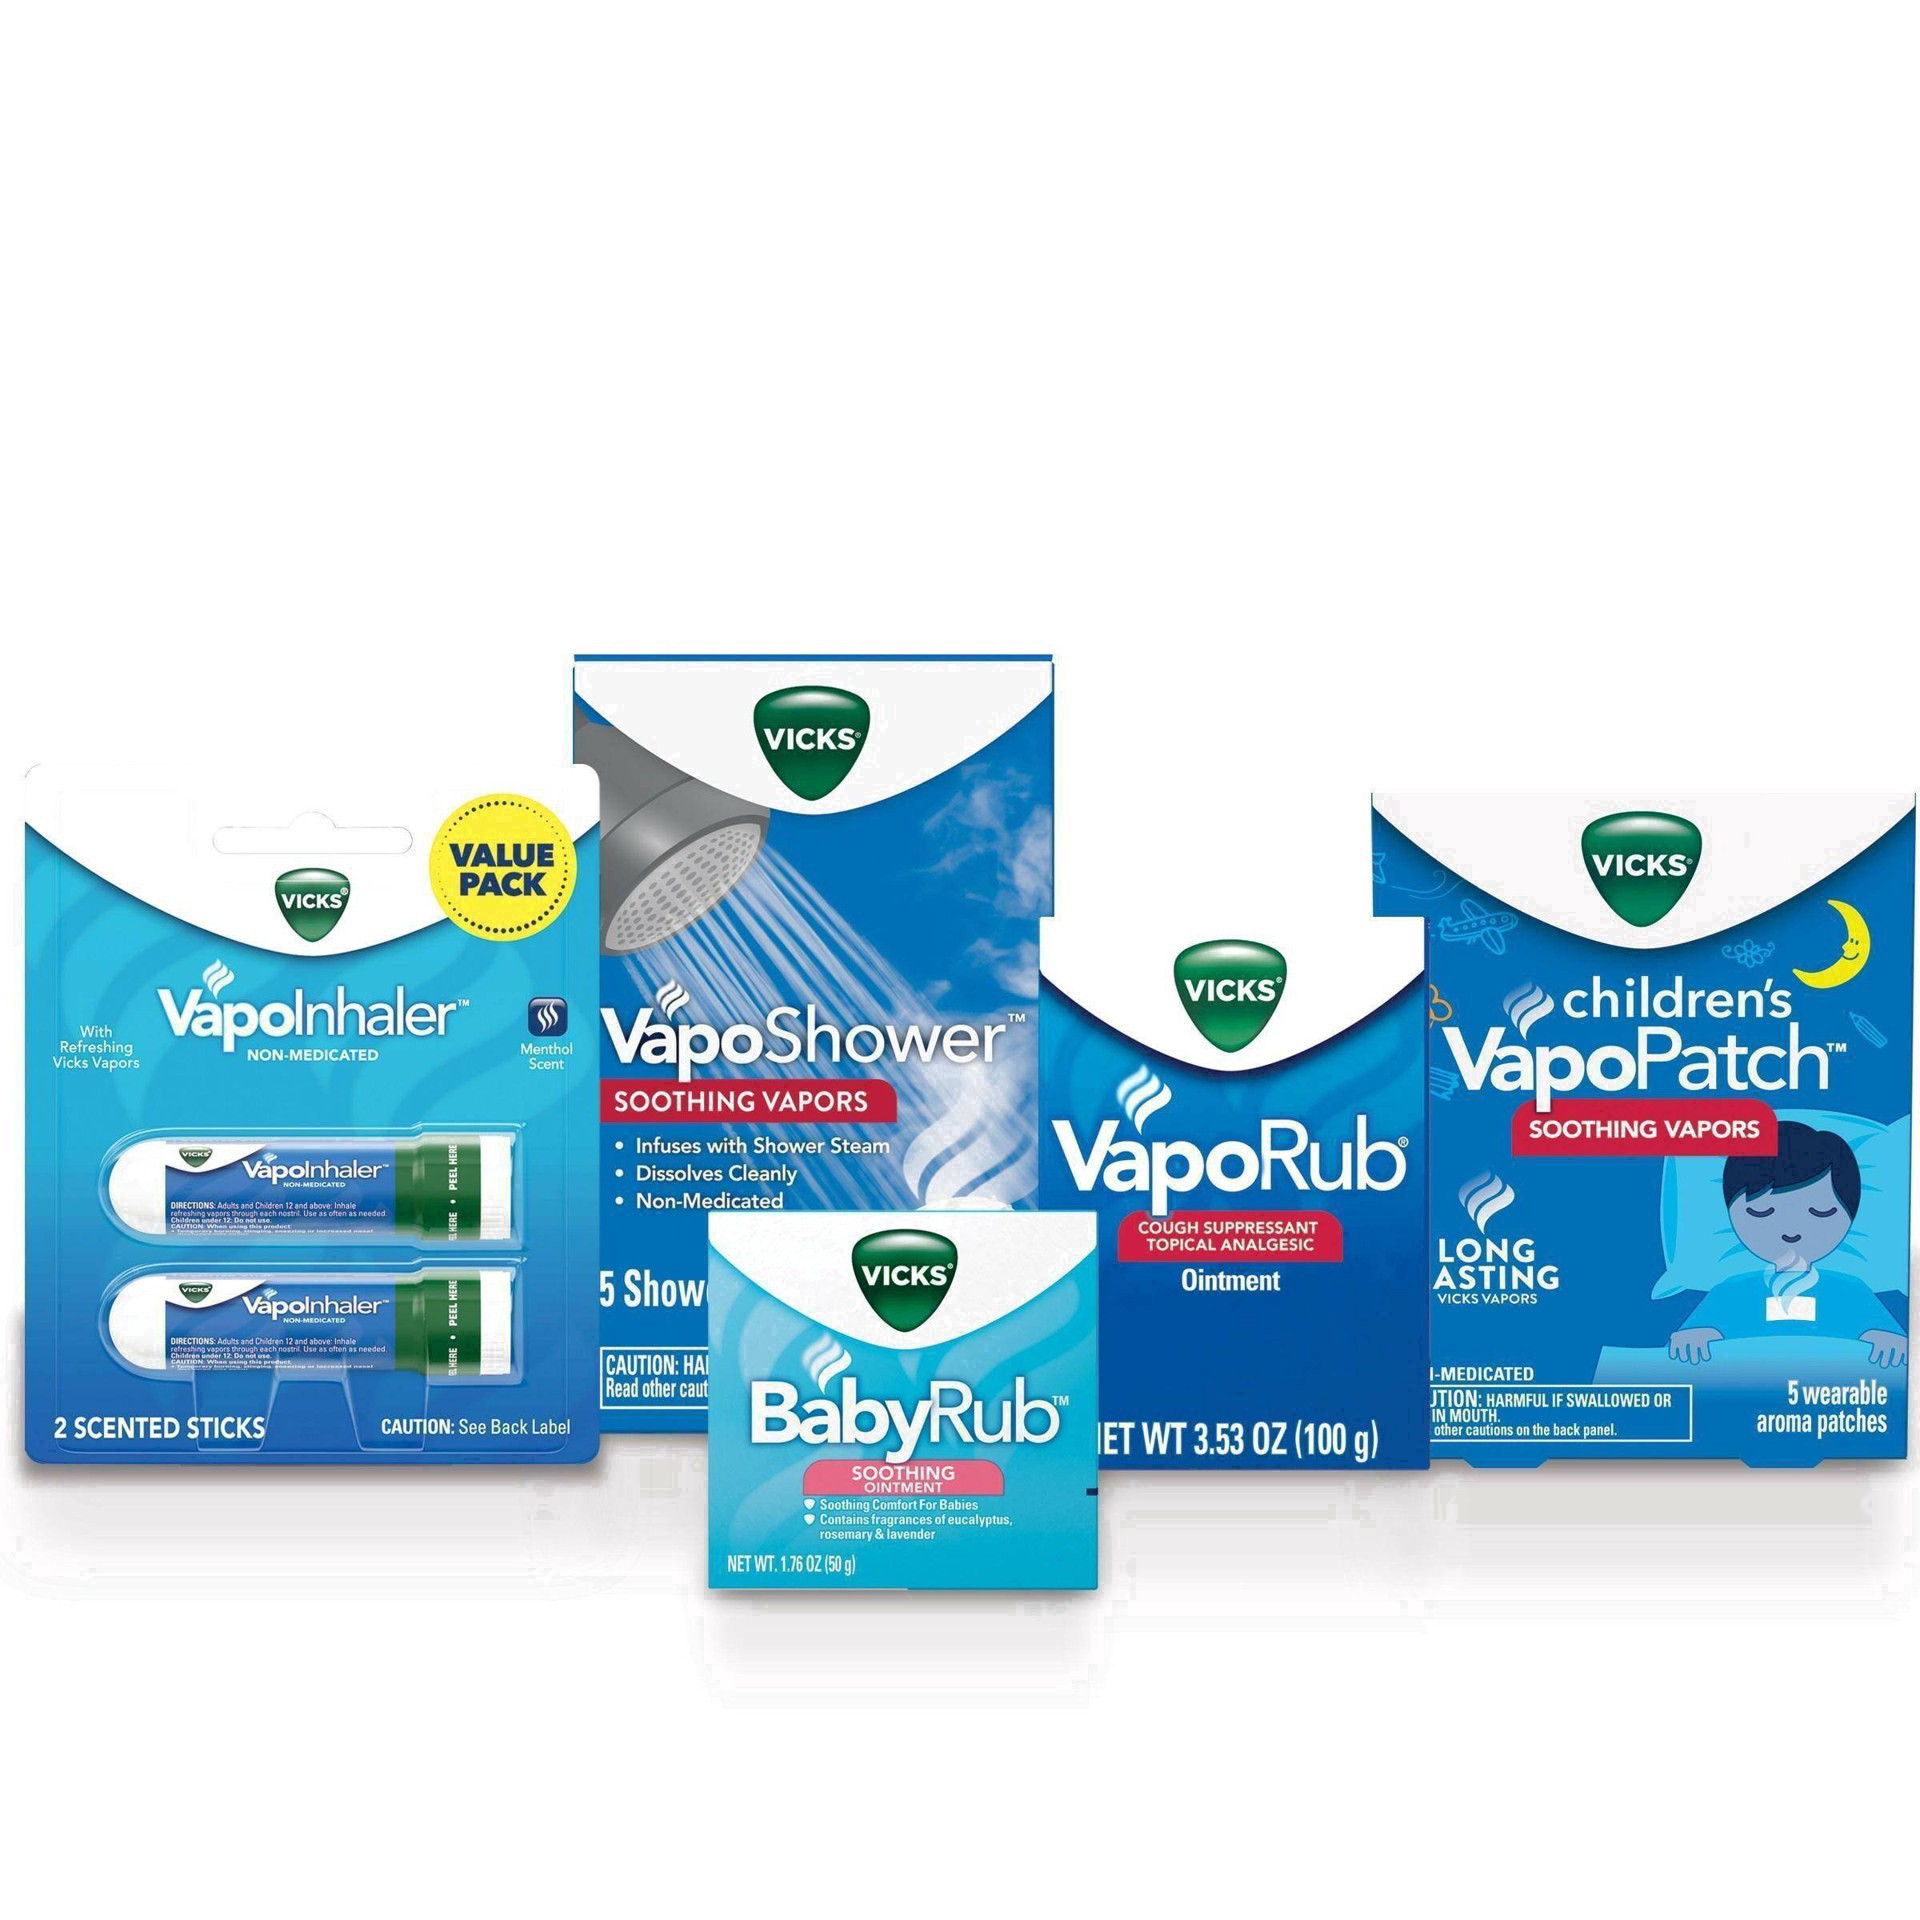 slide 33 of 37, Vicks Children's VapoPatch with Long Lasting Soothing Vapors - Menthol - 5ct, 5 ct